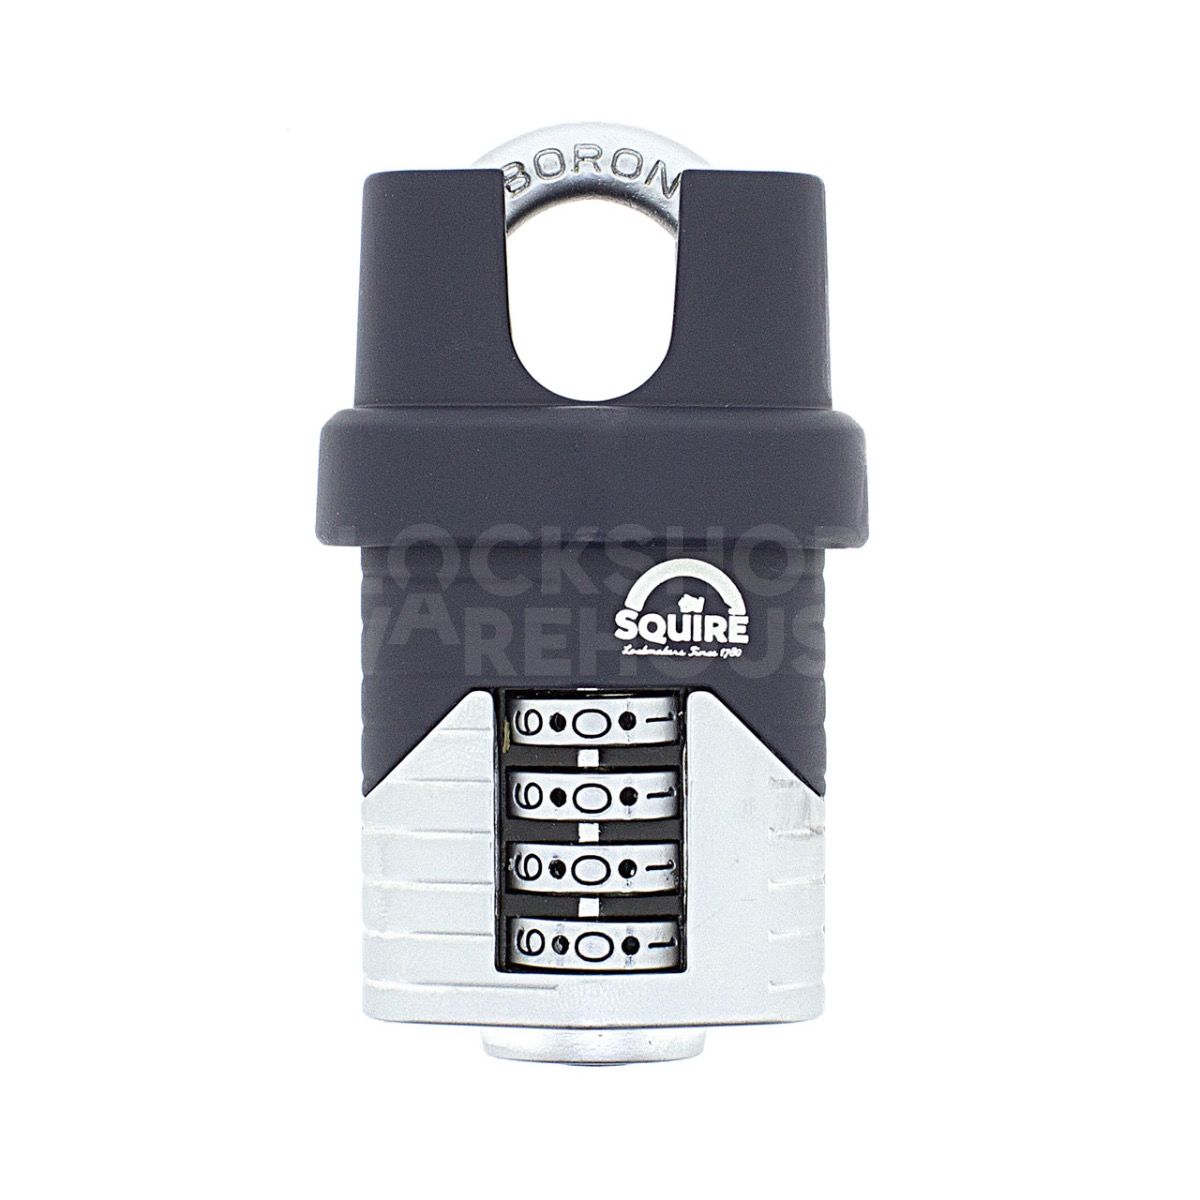 SQUIRE Vulcan 40mm Closed Shackle Combination Padlock - 4 Wheel